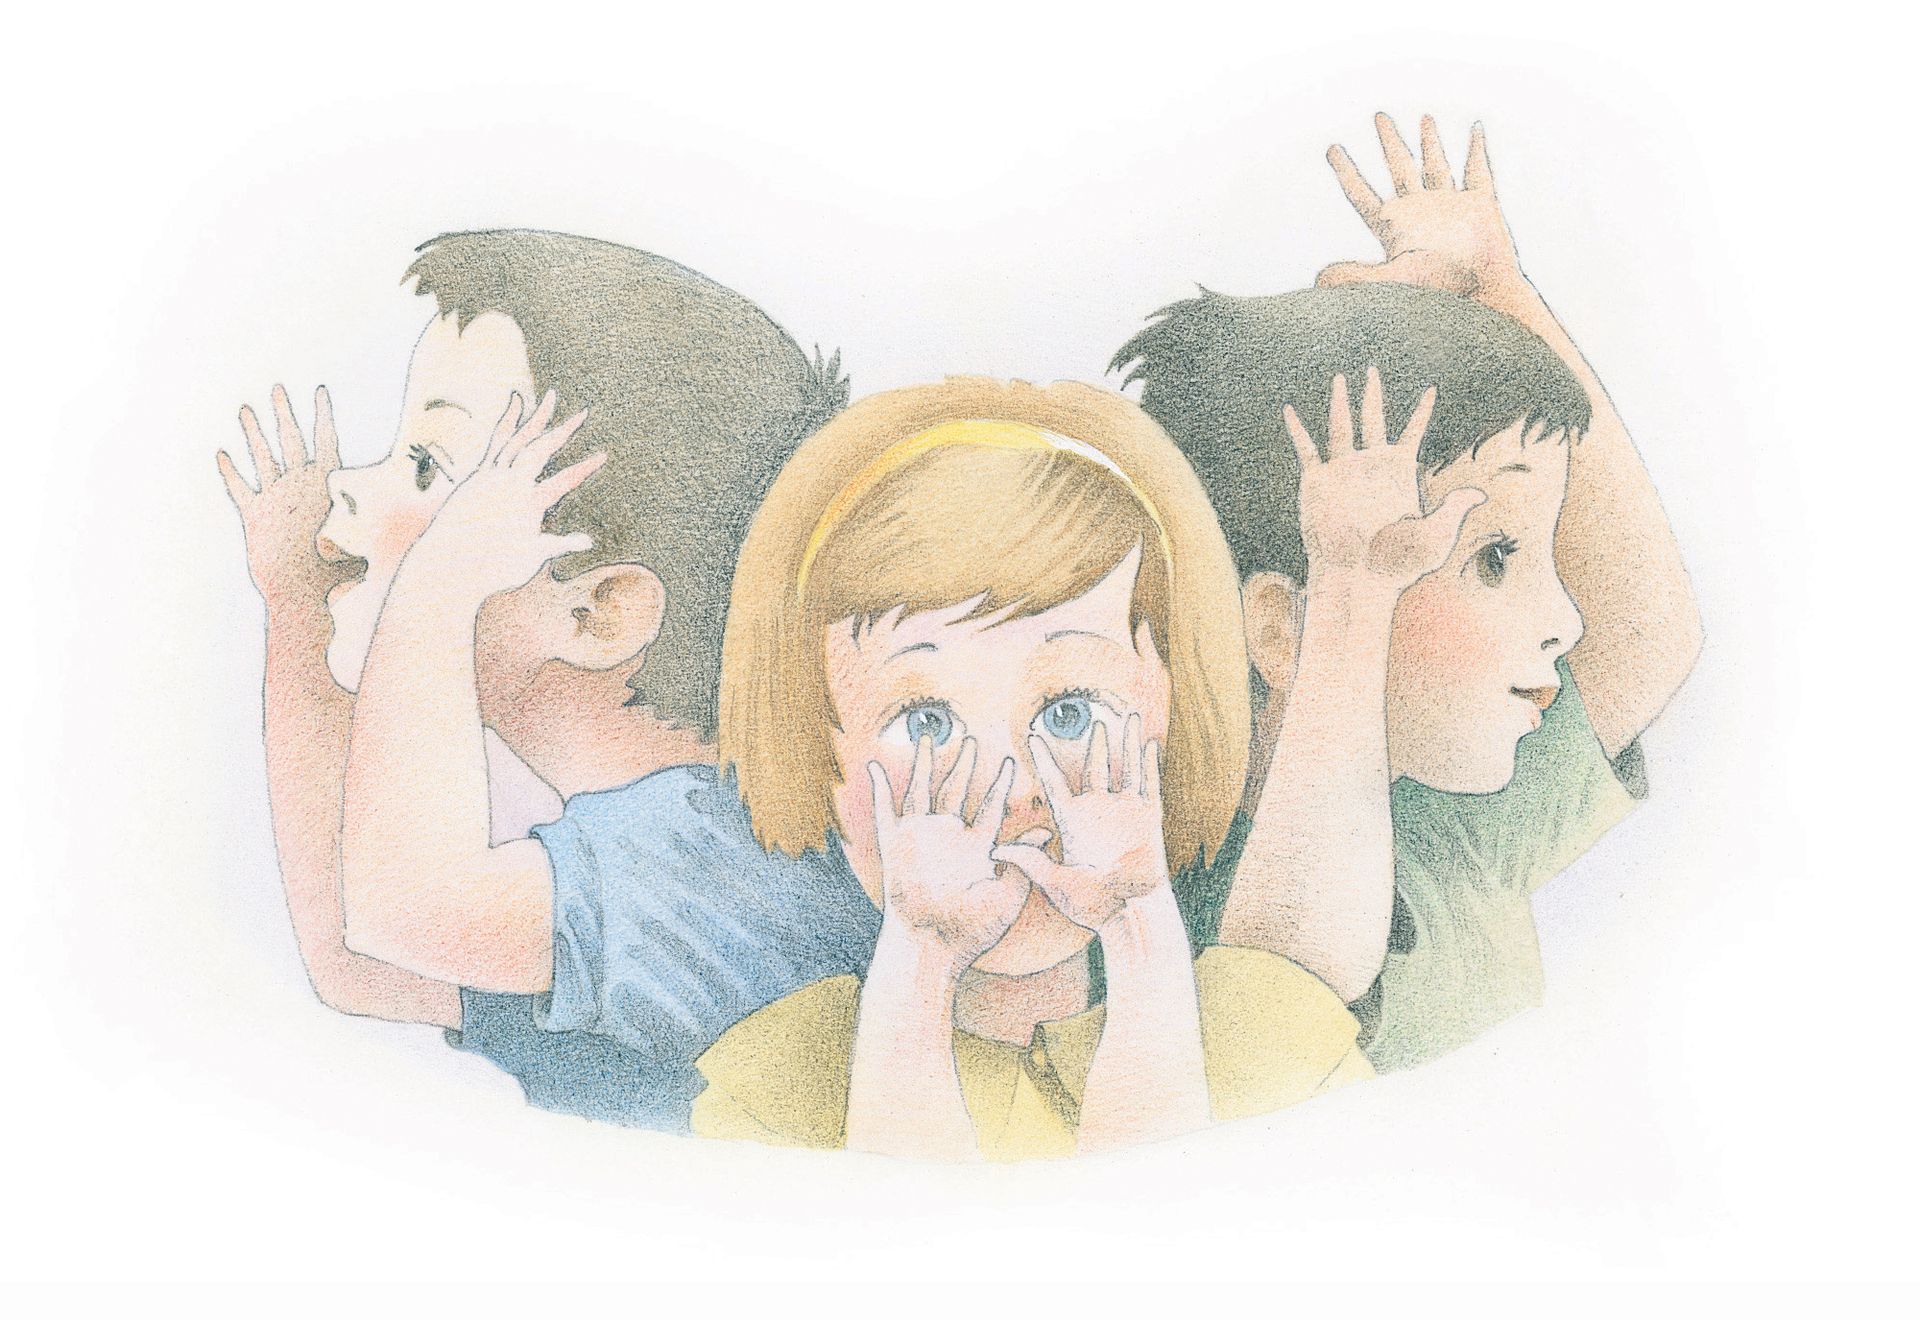 Three children singing and doing hand motions. From the Children’s Songbook, page 273, “My Hands”; watercolor illustration by Richard Hull.